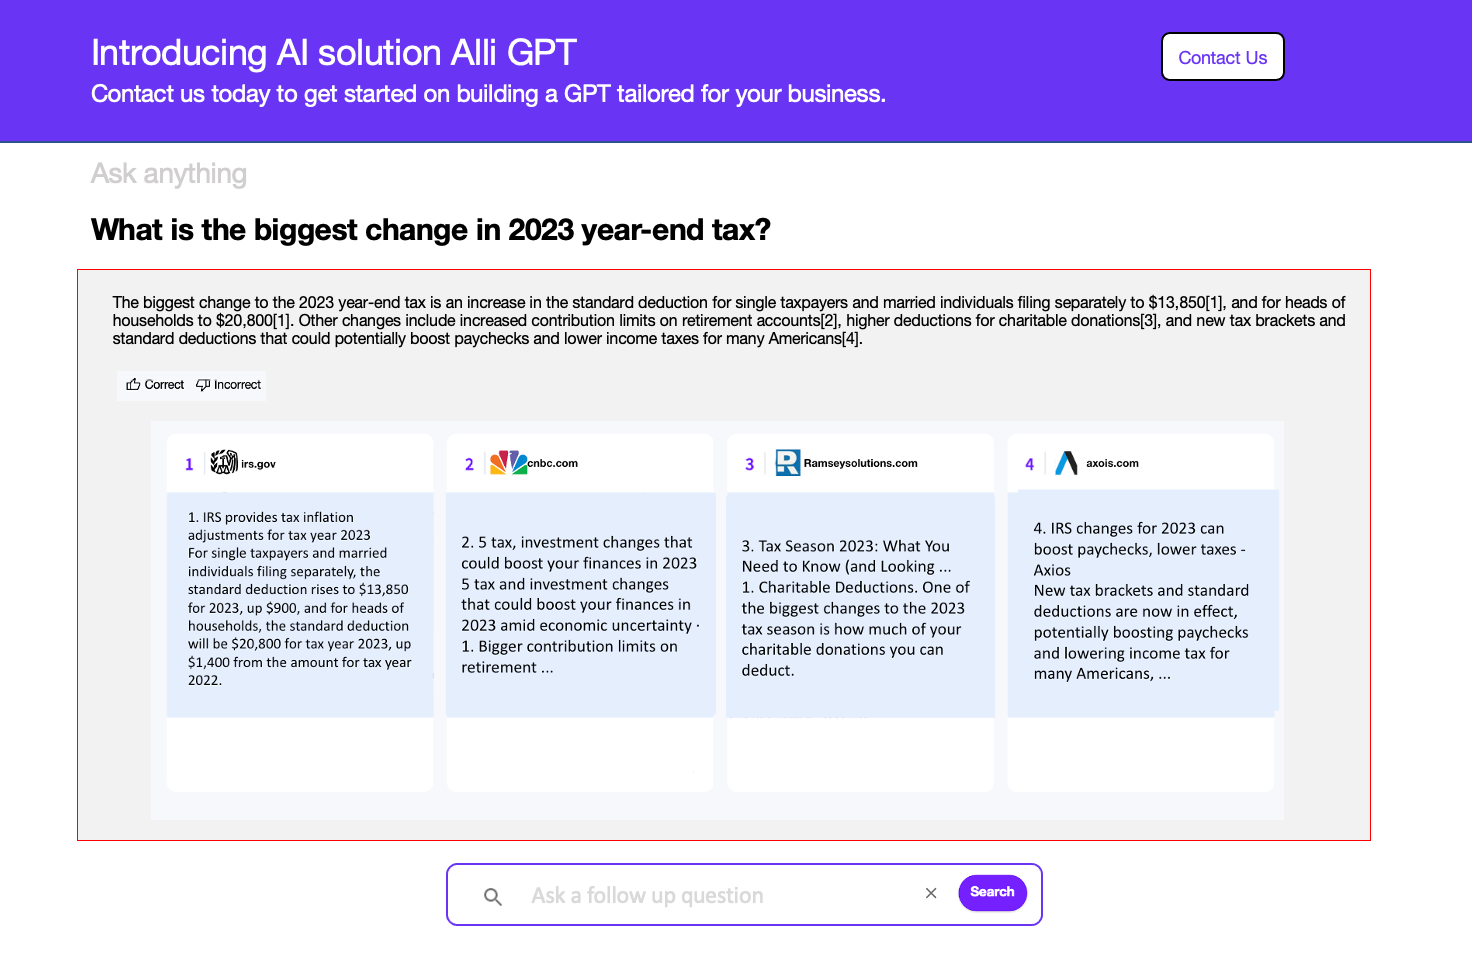 Allganize Introduces a new AI solution for businesses with Chat GPT